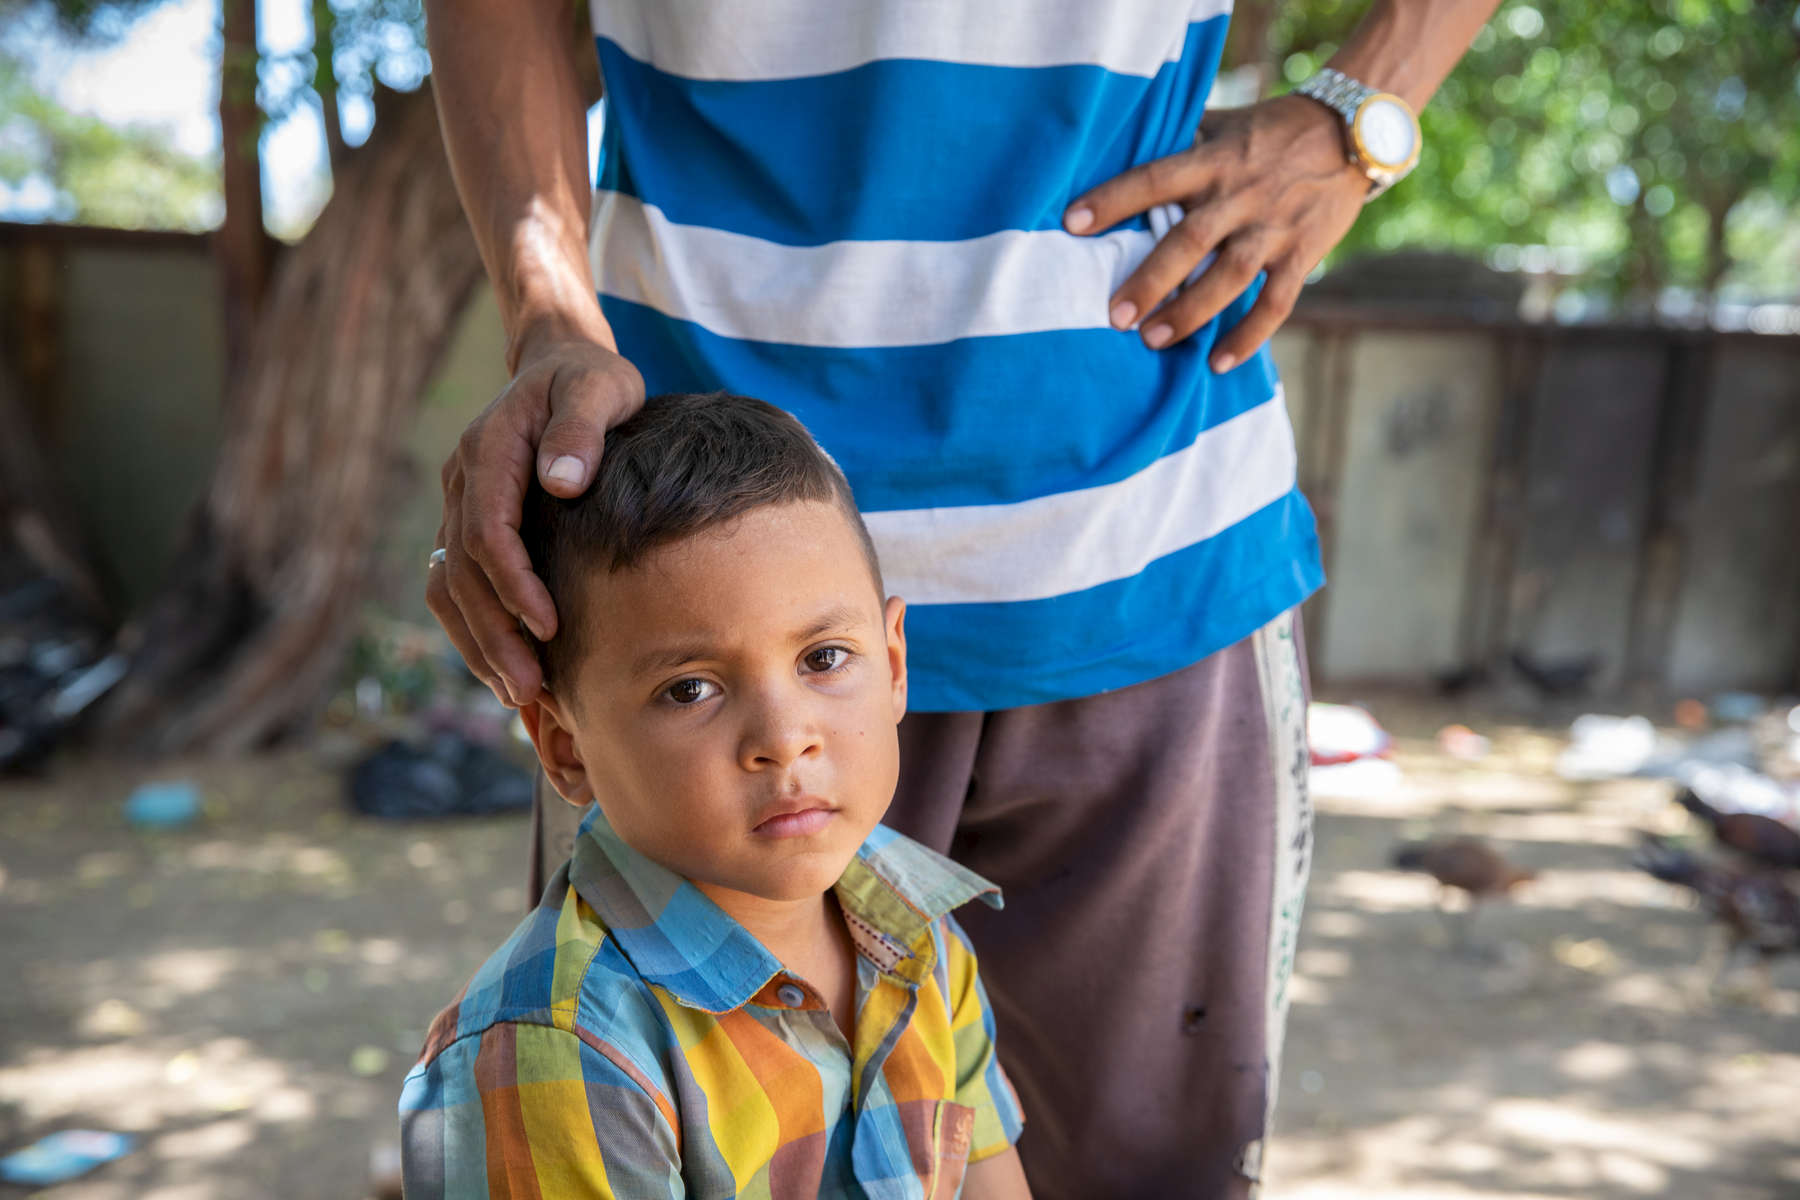 Eduard, 6. With his father Jose Eduardo Monasterio Castañeda, in front of their family's shack. Jose and his wife Ana Maria withstood the crisis in Venezuela for as long as they could, but when their situation grew so desperate that they were drinking glasses of water for dinner, they made the painful decision to leave their home and seek survival in Colombia. More than 1 million Venezuelans have fled to Colombia, fleeing economic, governmental and social collapse that has plunged the majority of the population into poverty, joblessness and near starvation. Many, like Jose and Ana Maria, are funneling into communities that already struggled with poverty and lack of opportunity, and resources are at a breaking point. Jose and Ana Maria now live with their five children in a small room at the back of another house along a busy street in Riohacha. They earn money selling small goods and mobile phone minutes on the street where they live, but the income is not enough and Jose worries about his children’s future. Mercy Corps is distributing emergency cash to help vulnerable Venezuelans in Colombia meet their urgent needs, including food, medicine and shelter. Ana Maria was pregnant with 3-month-old Fabiola when the family received their cash disbursement from Mercy Corps, and the money allowed her to get medical care for the birth. They say they would have had no way to go to the hospital without the assistance. The family also purchased essential household items for their shelter. 